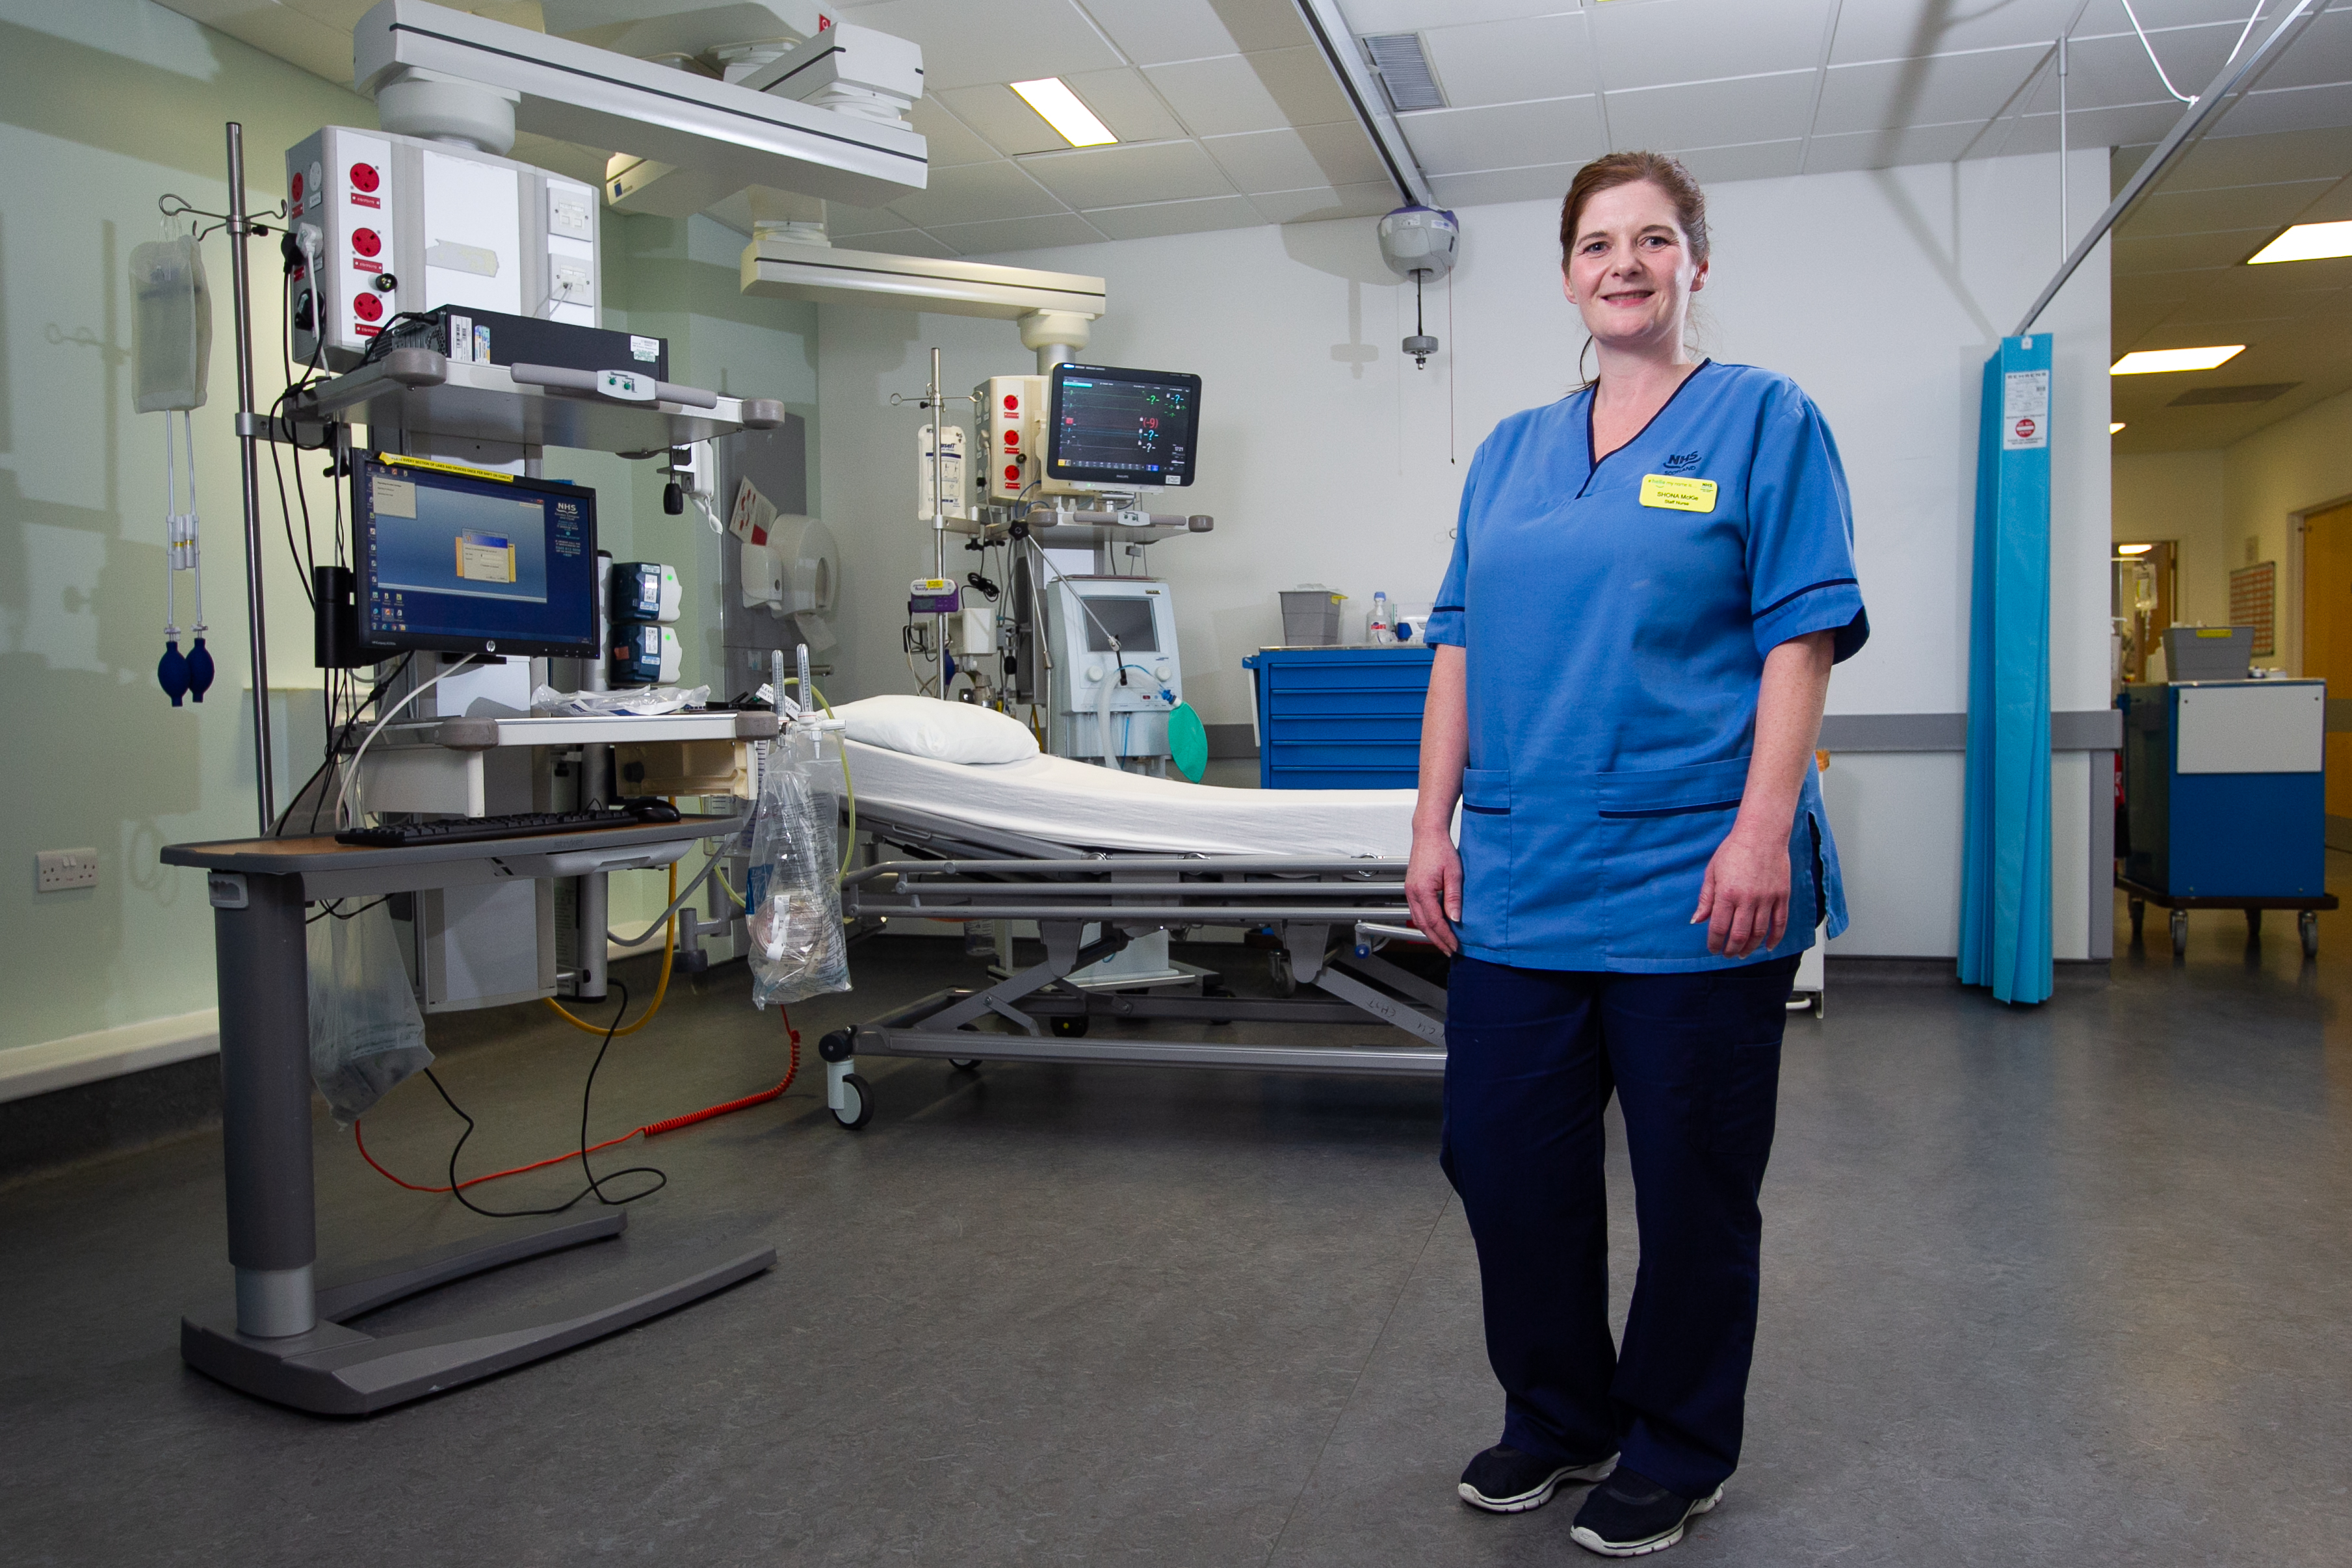 Shona McKie, who works in intensive care